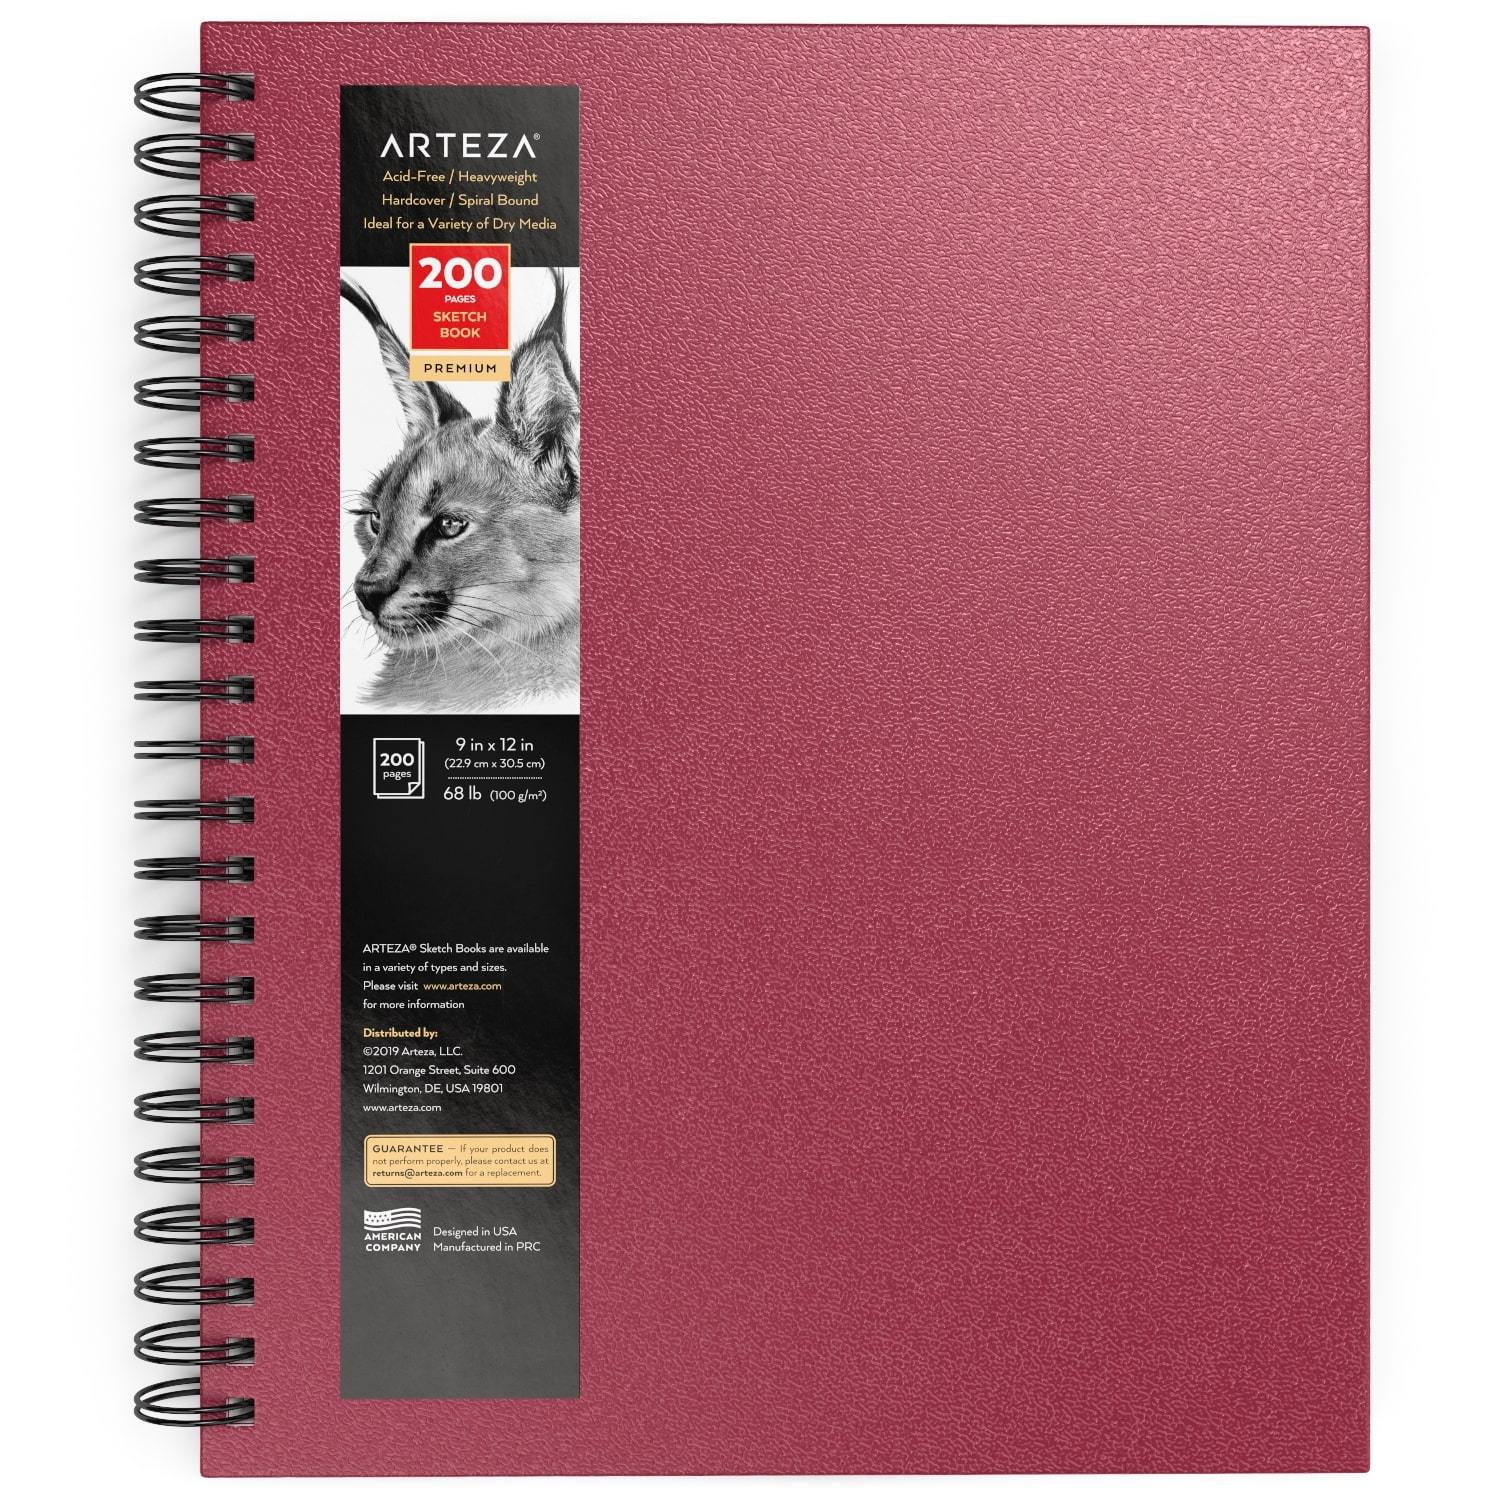 Arteza Hardcover Sketchbook, 9 x 12 Inches, 100 Sheets — 200 Pages, Pink Cover, Spiral-Bound 68-lb Drawing Pad, Art Supplies for Drawing with Dry